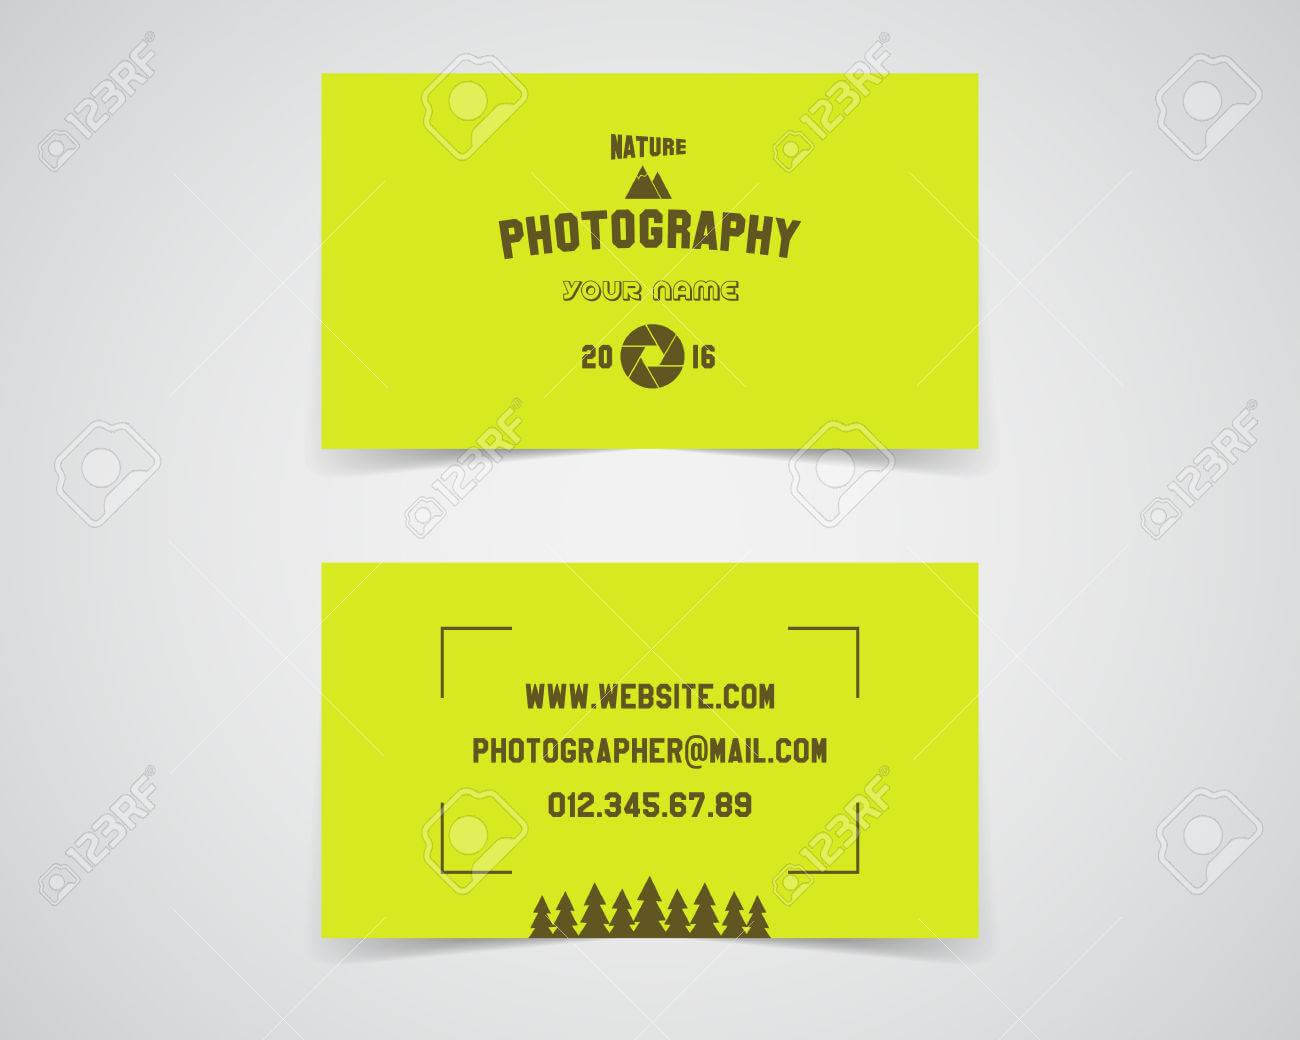 Modern Light Business Card Template For Nature Photography Studio With Photographer Id Card Template